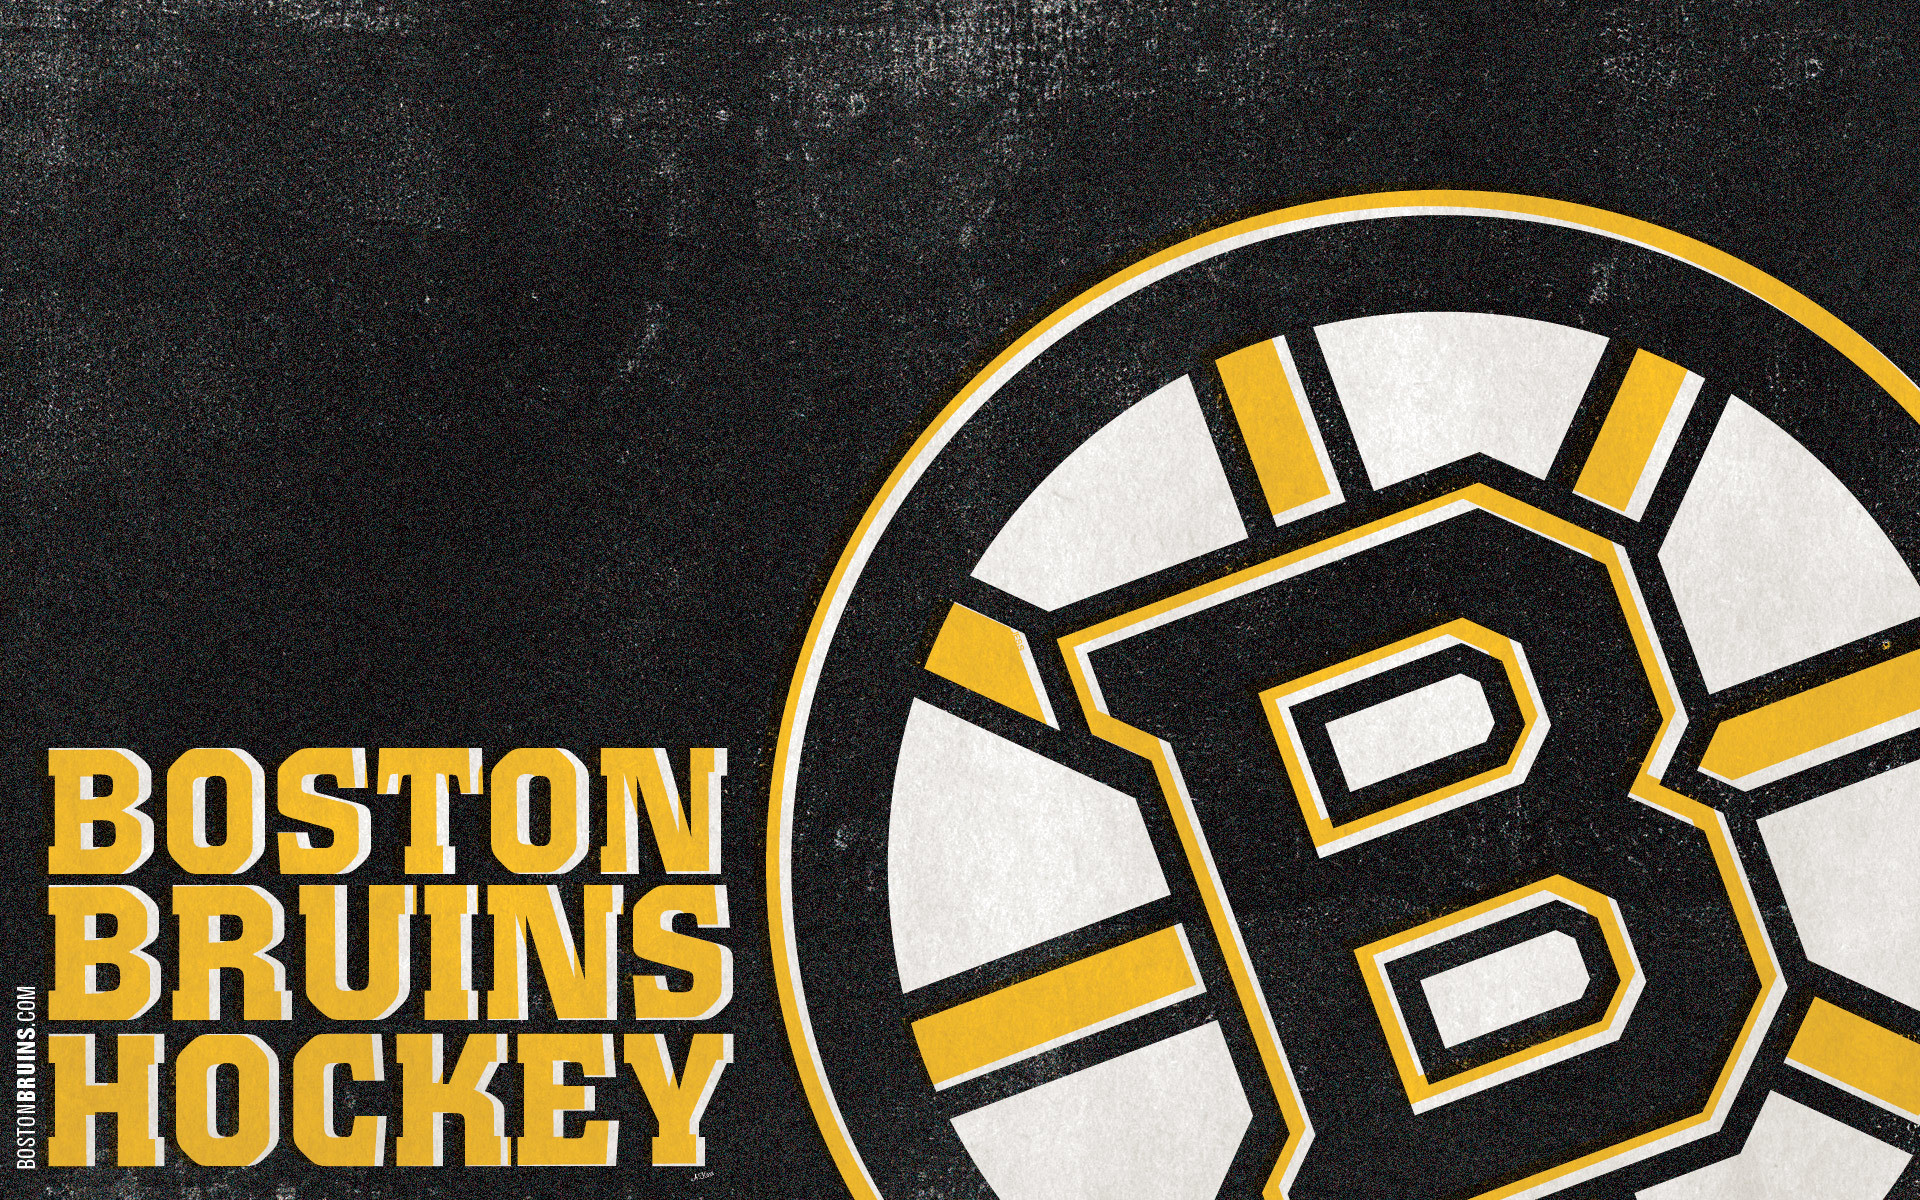 Boston Bruins  63 here to grace those backgrounds  Facebook